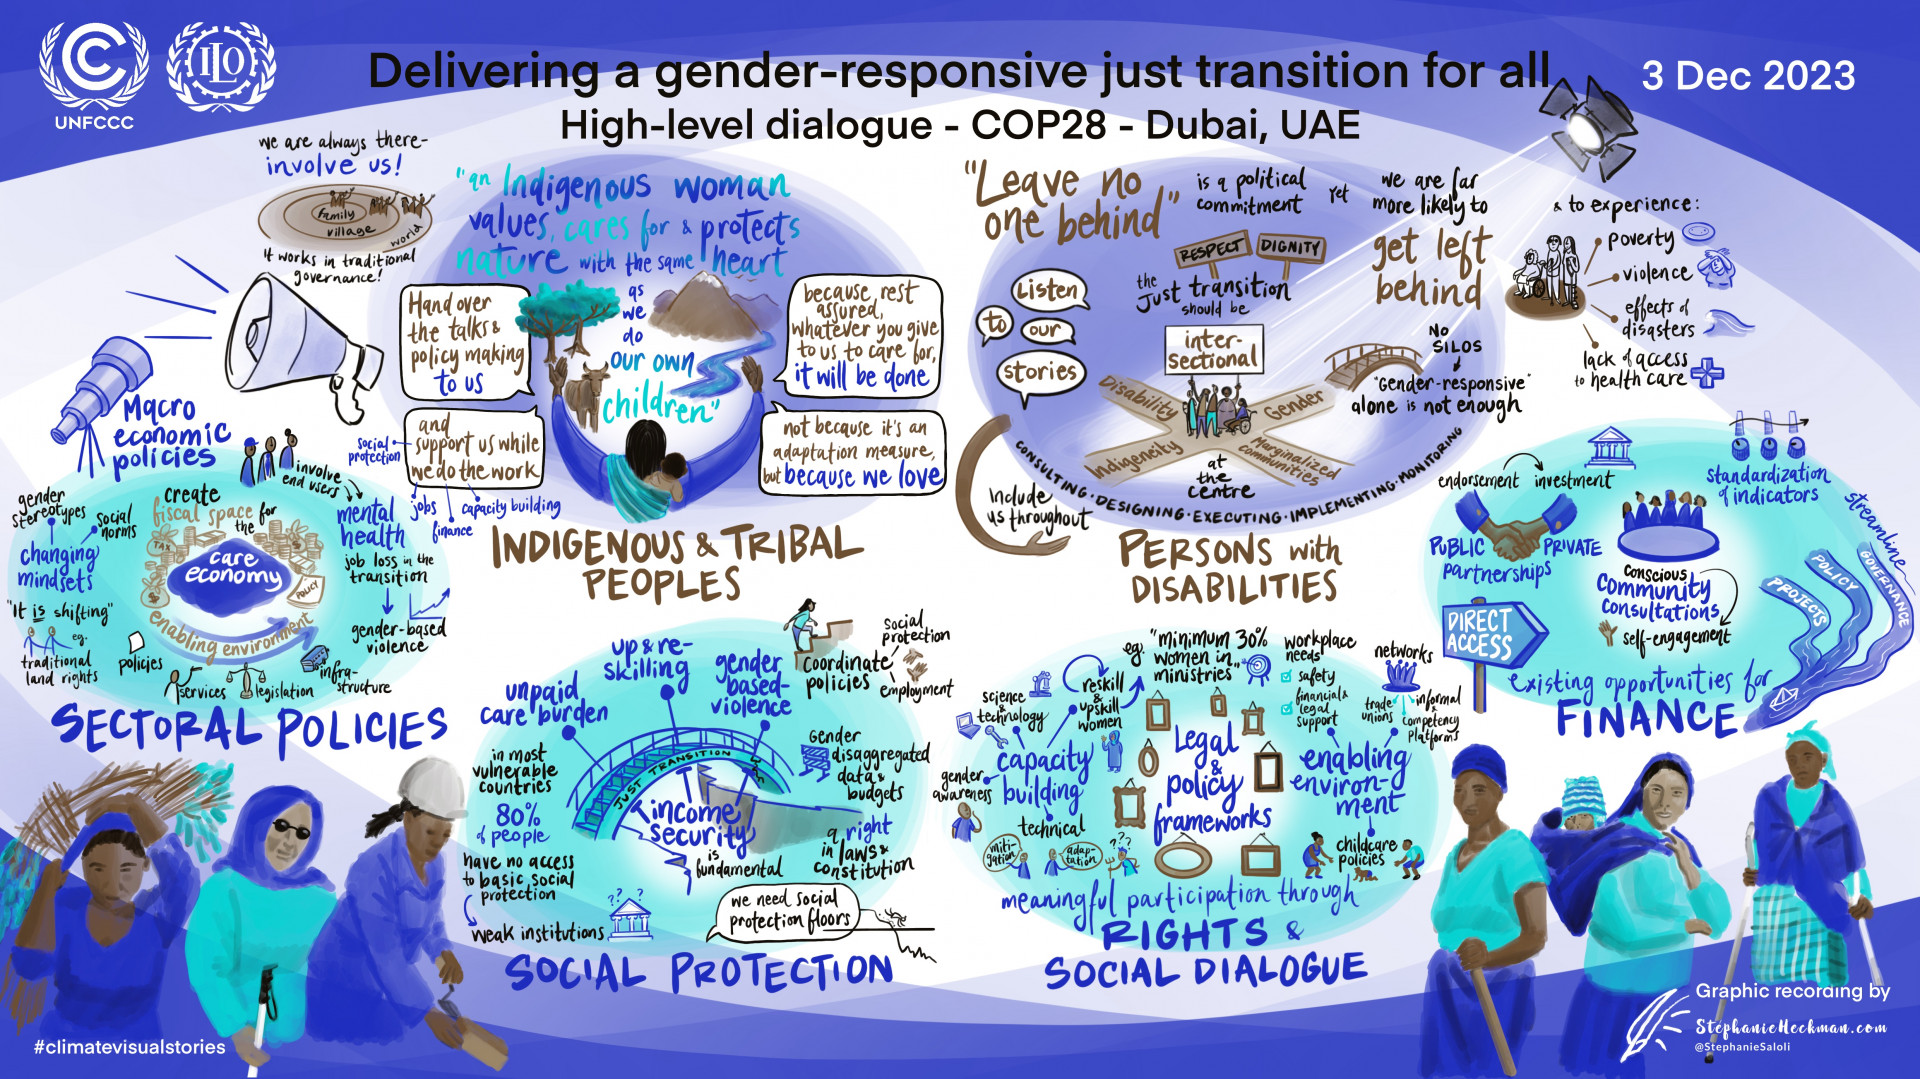 Delivering a gender-responsive just transition for all - A High-Level Dialogue ILO/UNFCCC - Graphic recording